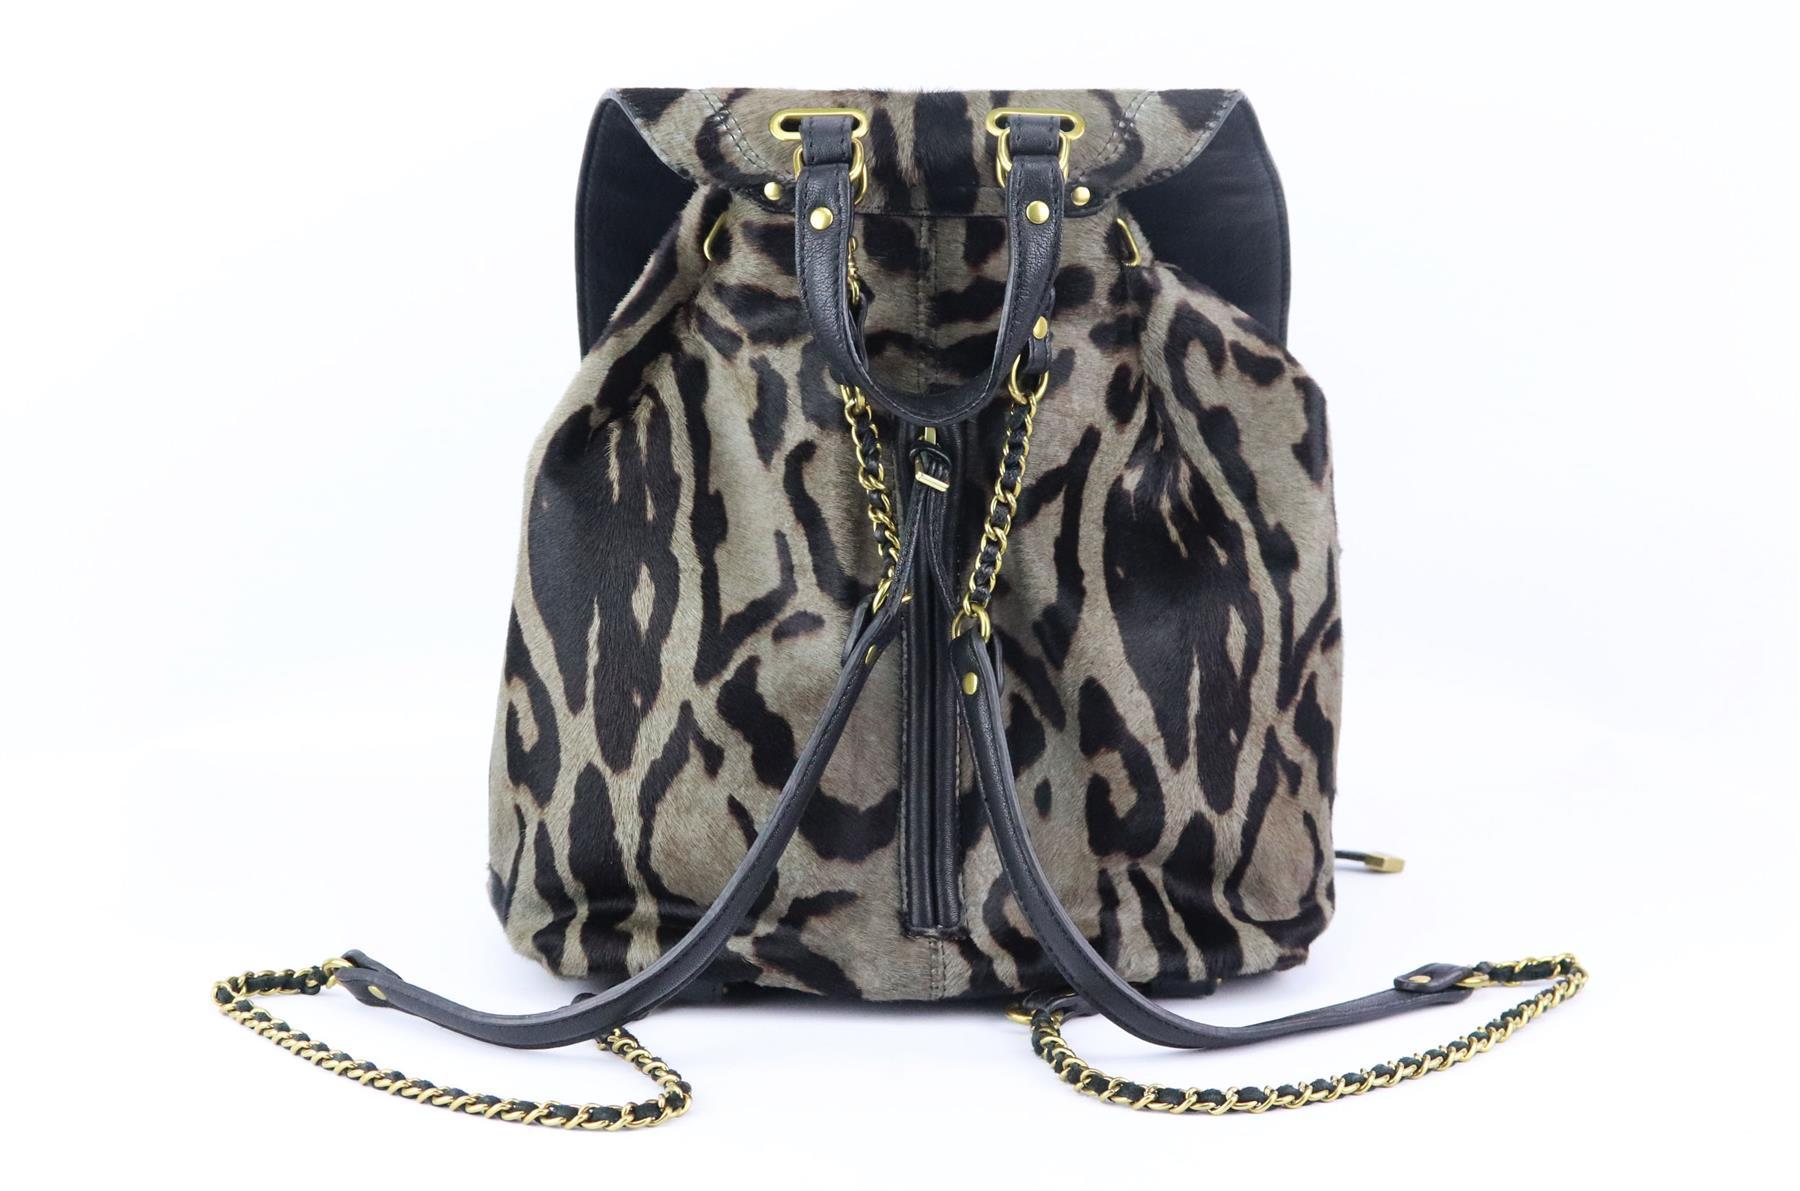 This ‘Florent’ backpack by Jérôme Dreyfuss is perfect for those day-to-day looks, composed with supple dark-grey and black leopard-print calf hair and leather, it is accented with antiqued gold-tone hardware with a drawstring fastening and large